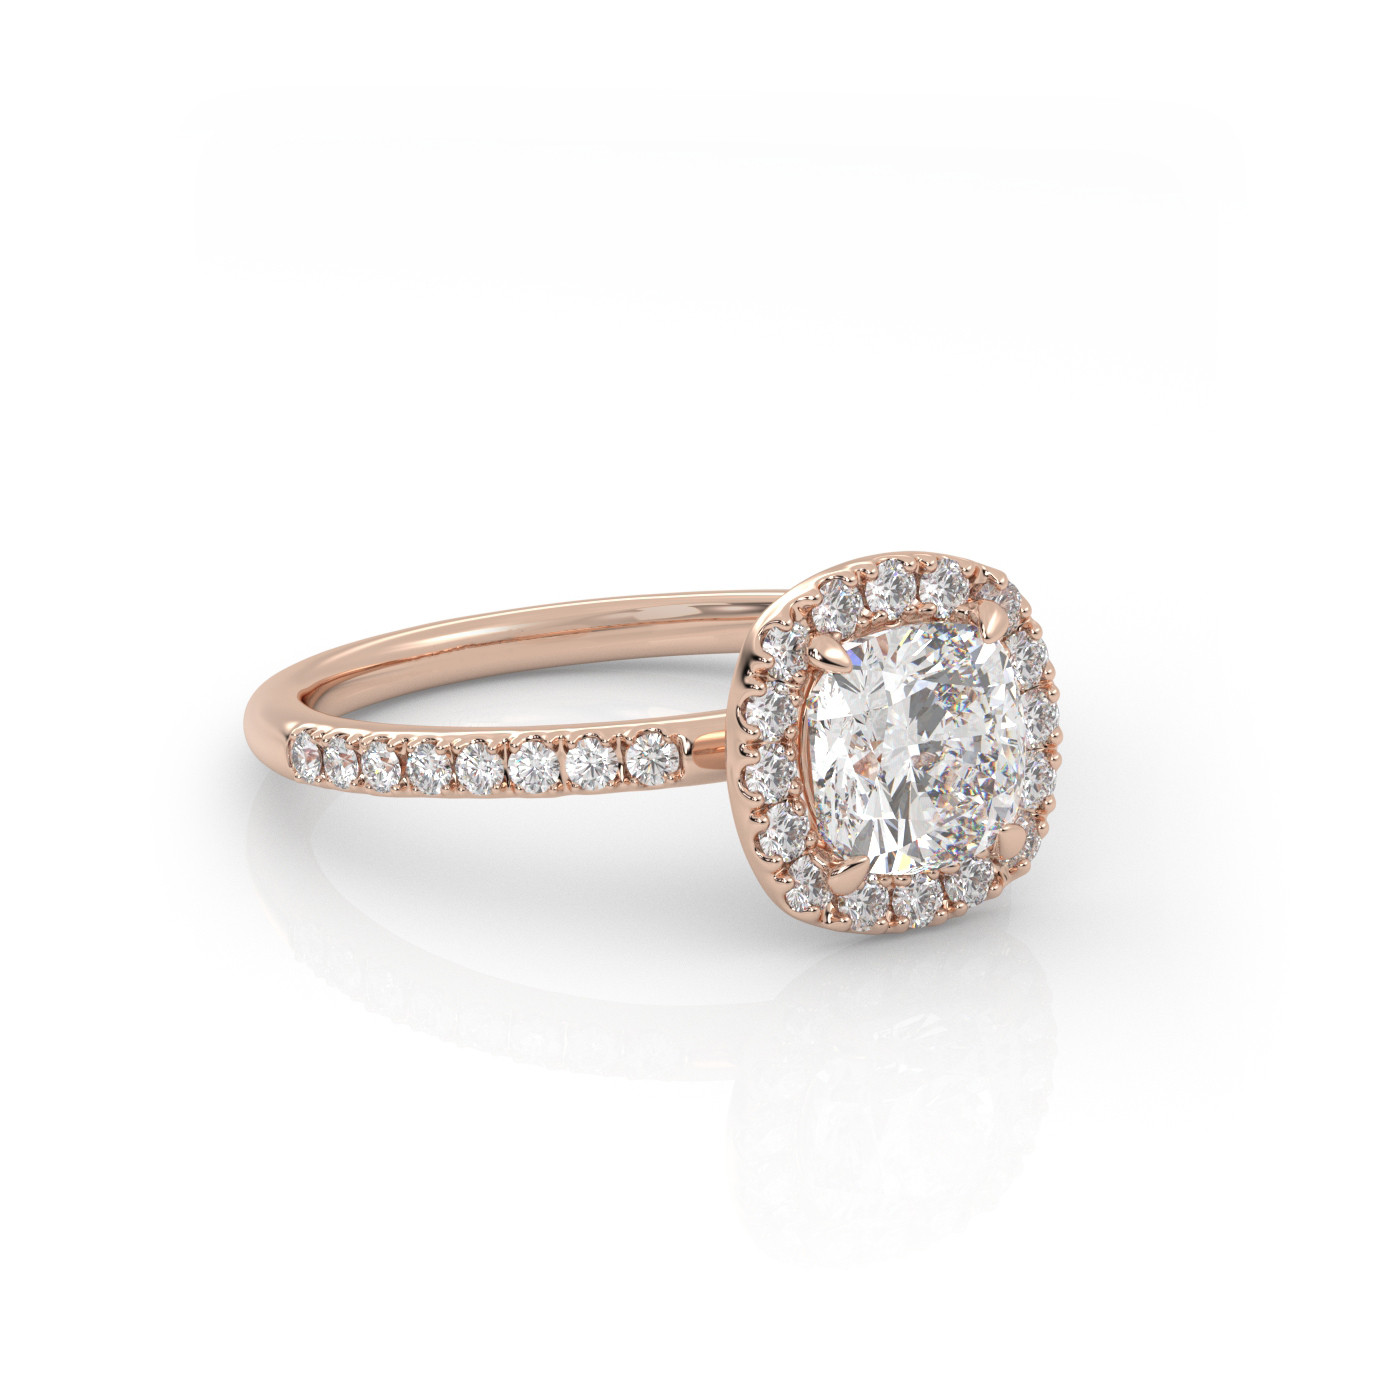 18K ROSE GOLD Cushion Diamond Engagement Ring With Pave and Halo Style